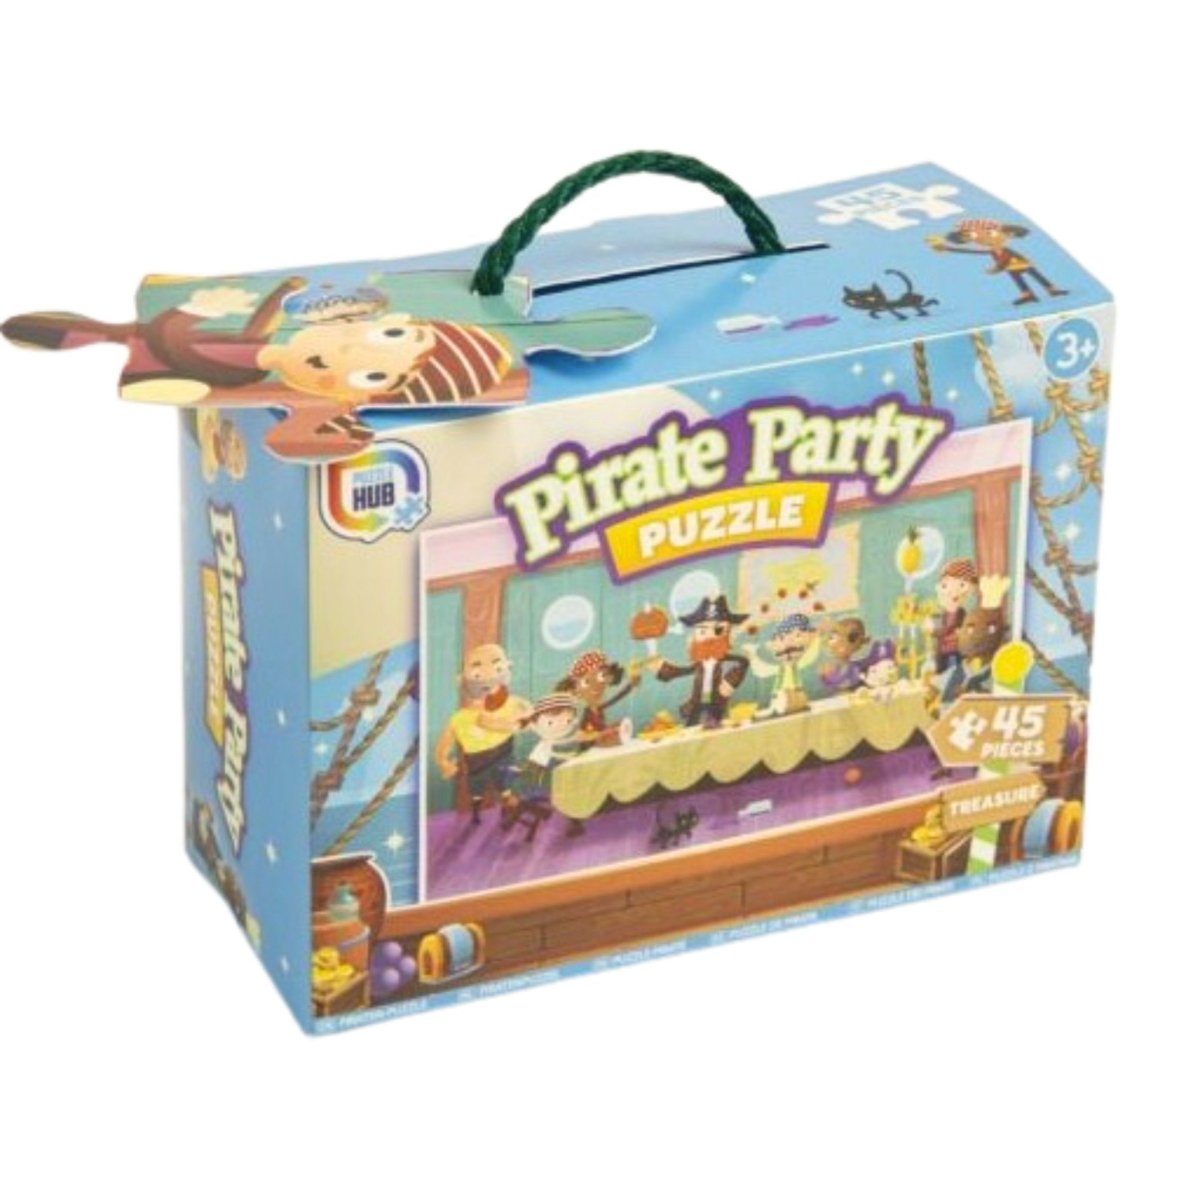 Pirate Party Puzzle 45 Piece - Kids Party Craft